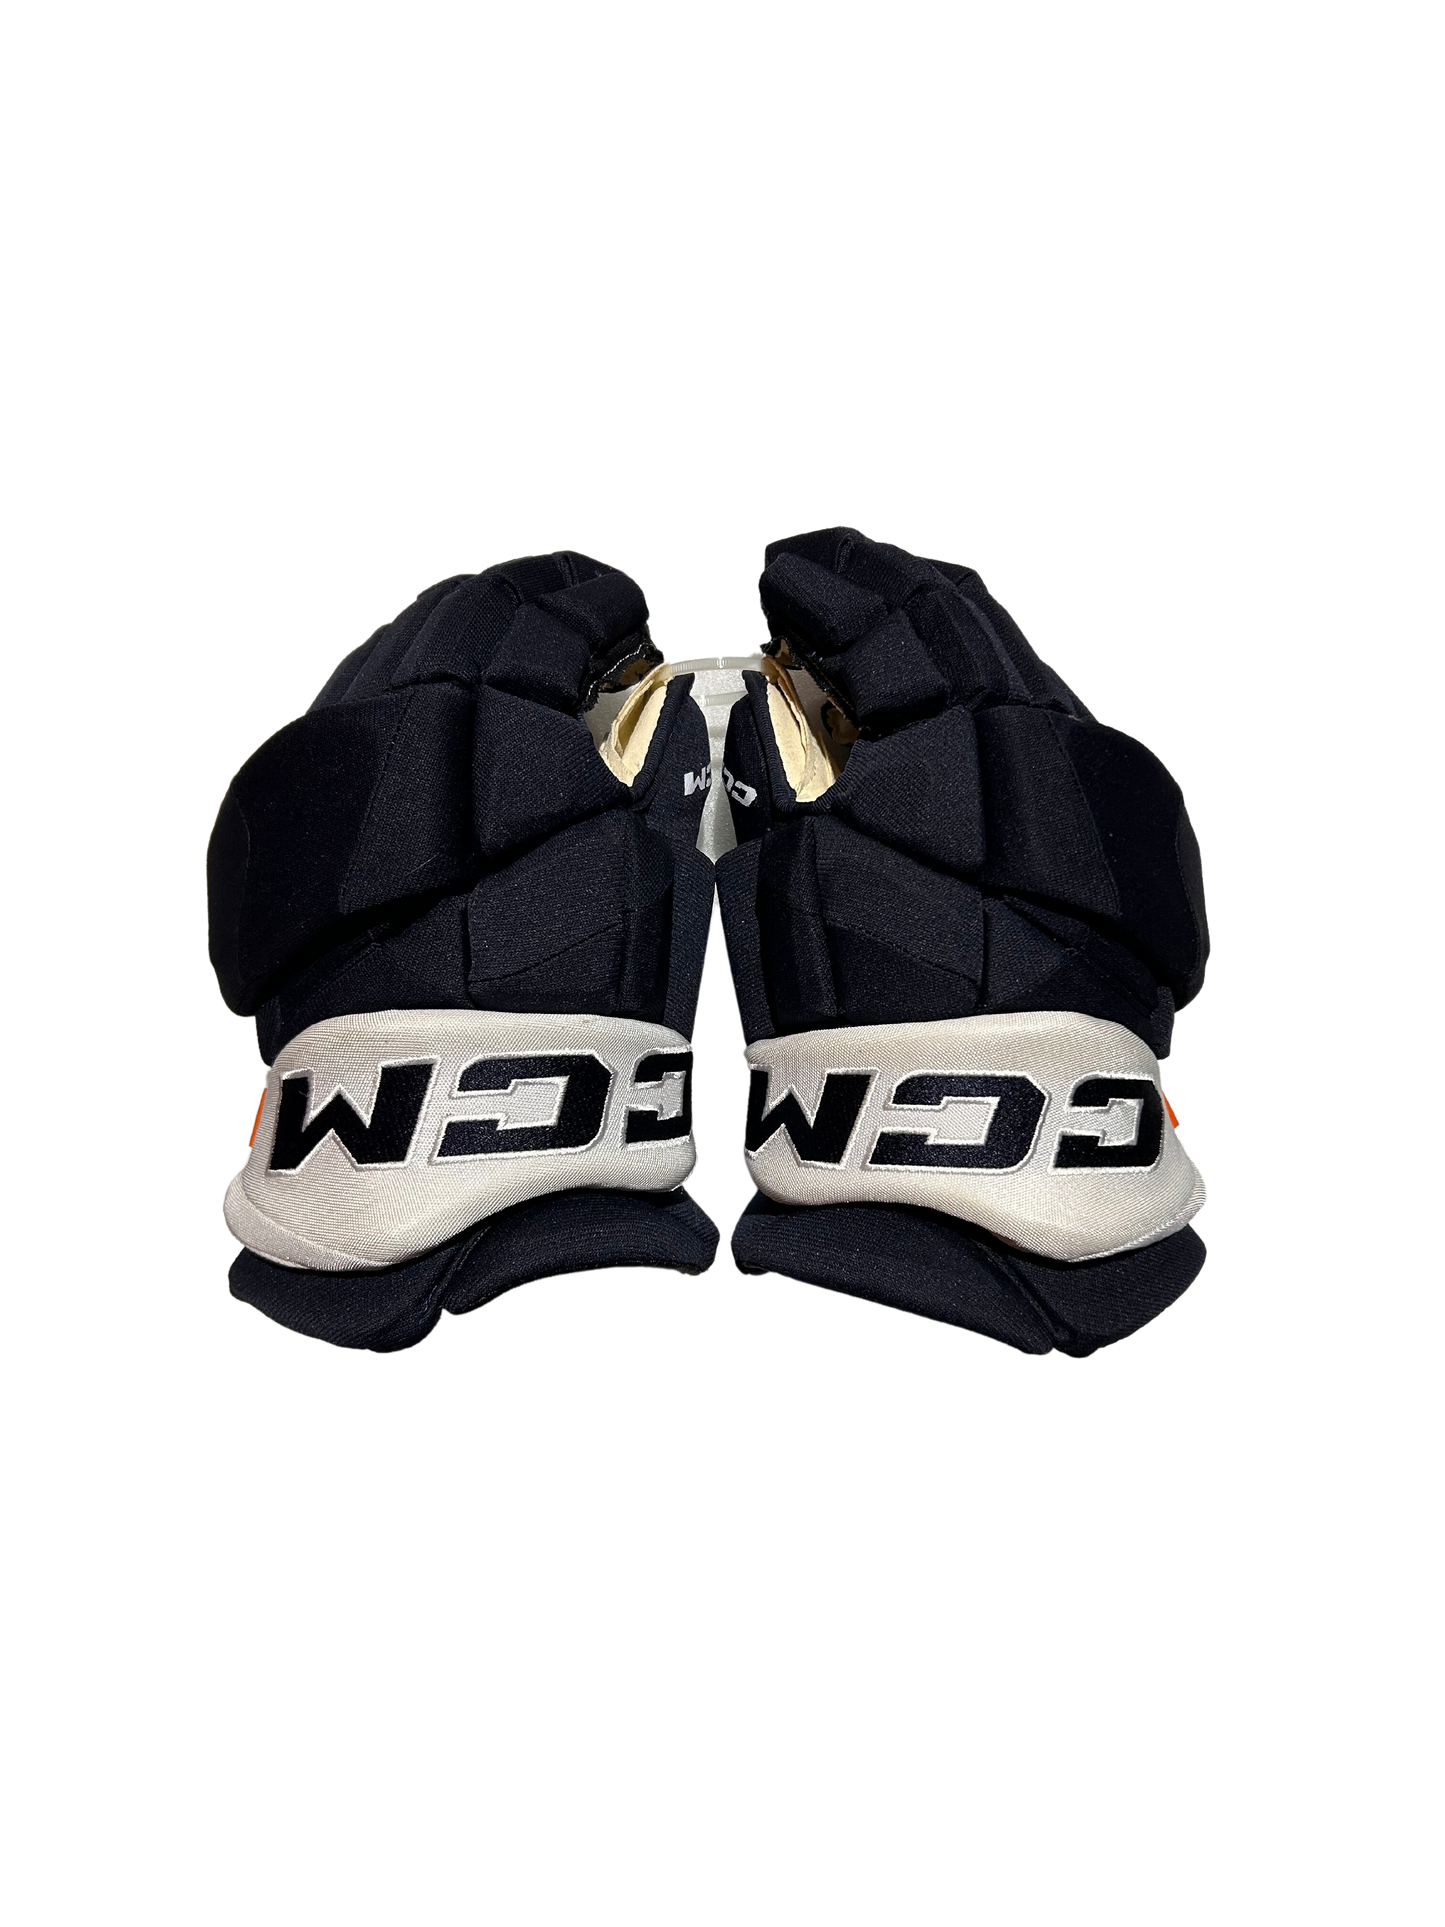 New Navy & White Team Issued Colorado Avalanche 14" CCM Jetspeed Gloves